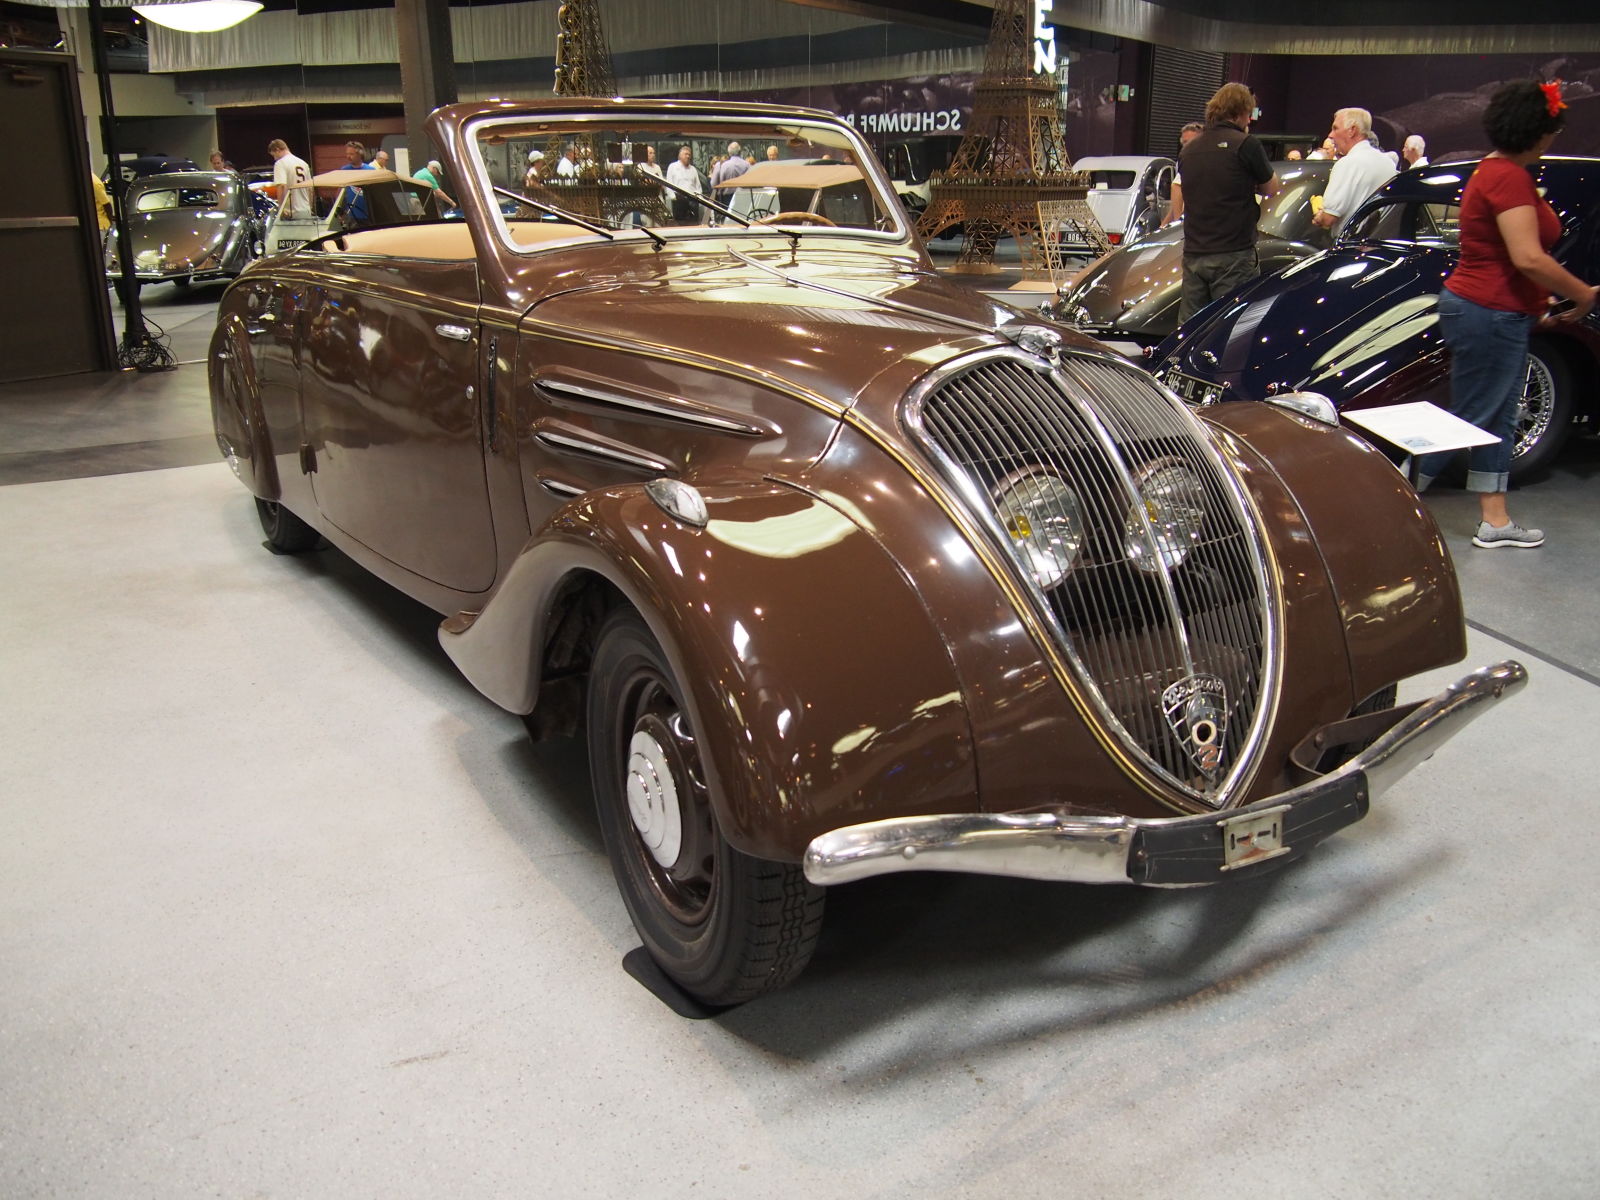 A beautiful brown Peugeot 402L Cabriolet. This car has the first retractable hardtop.